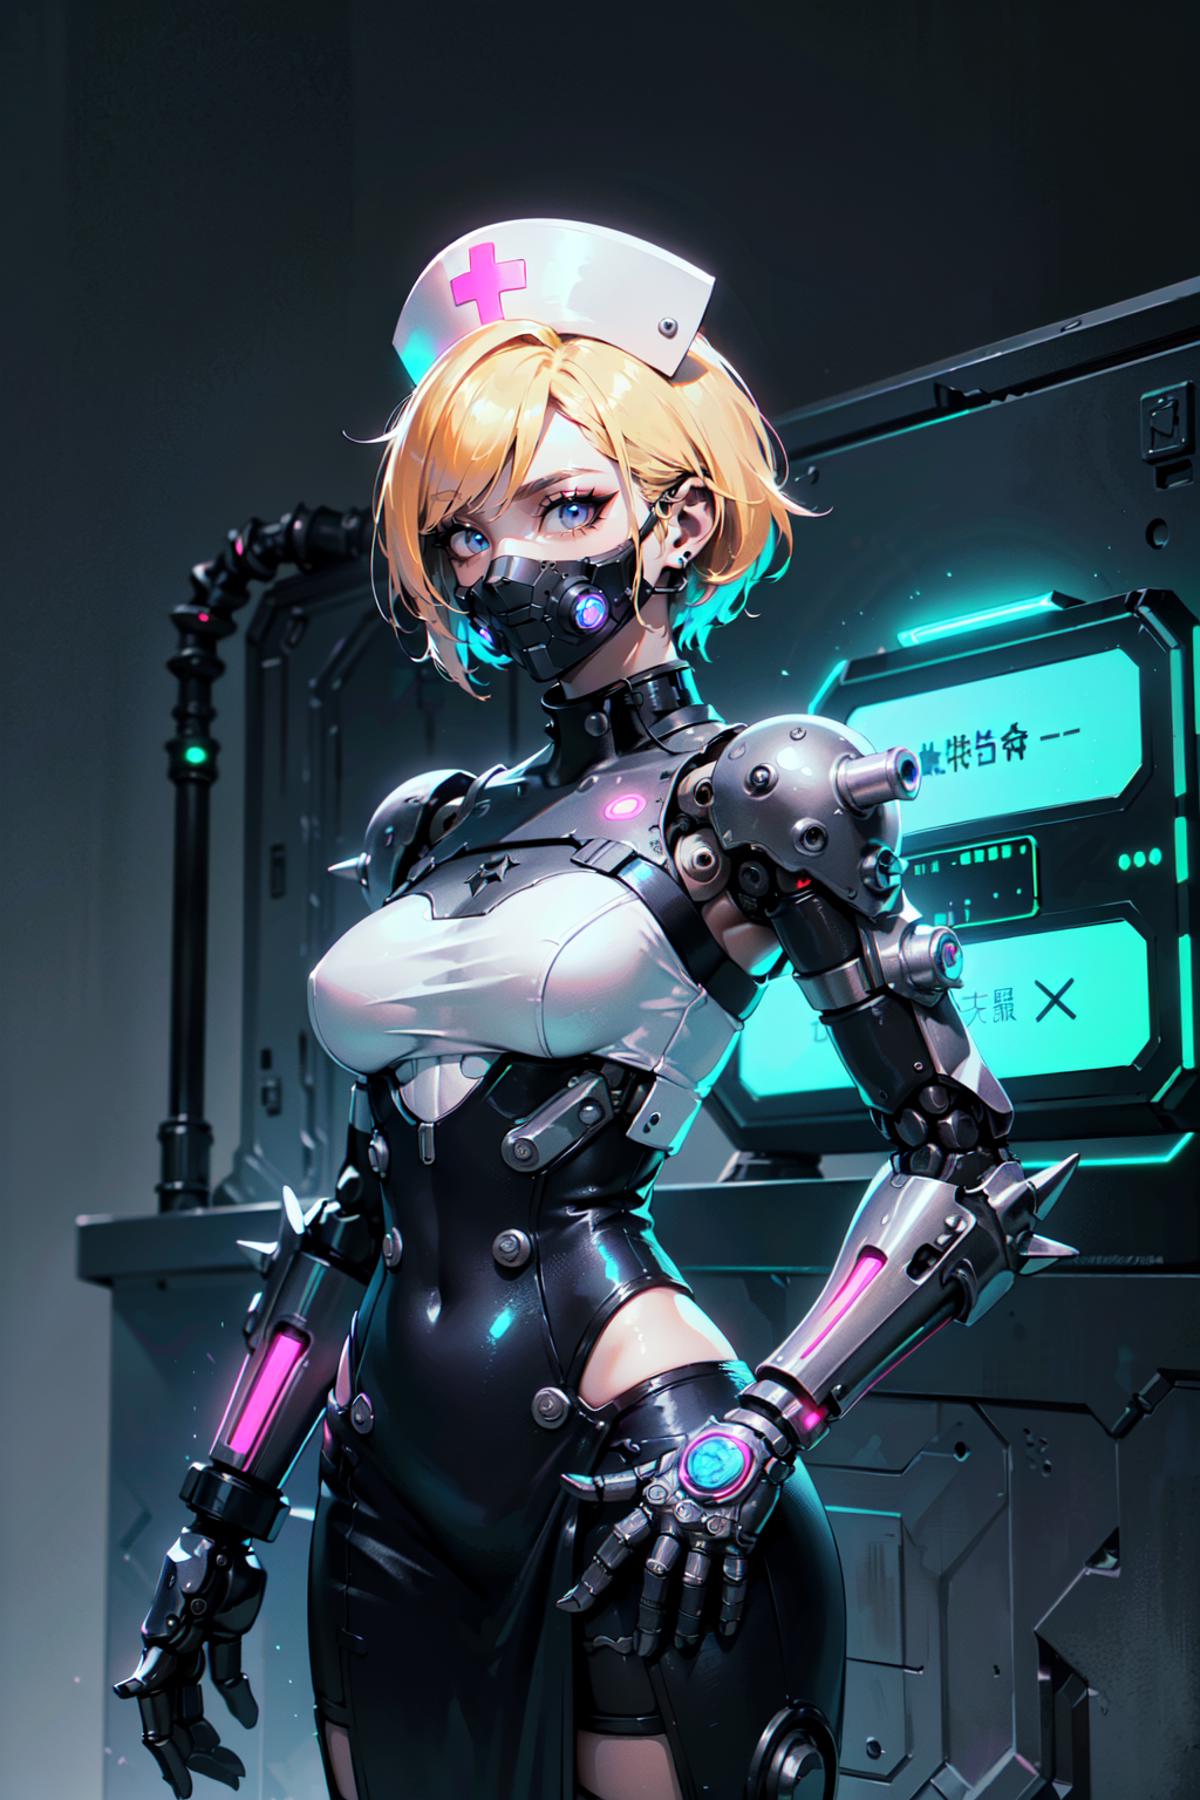 AI model image by dice